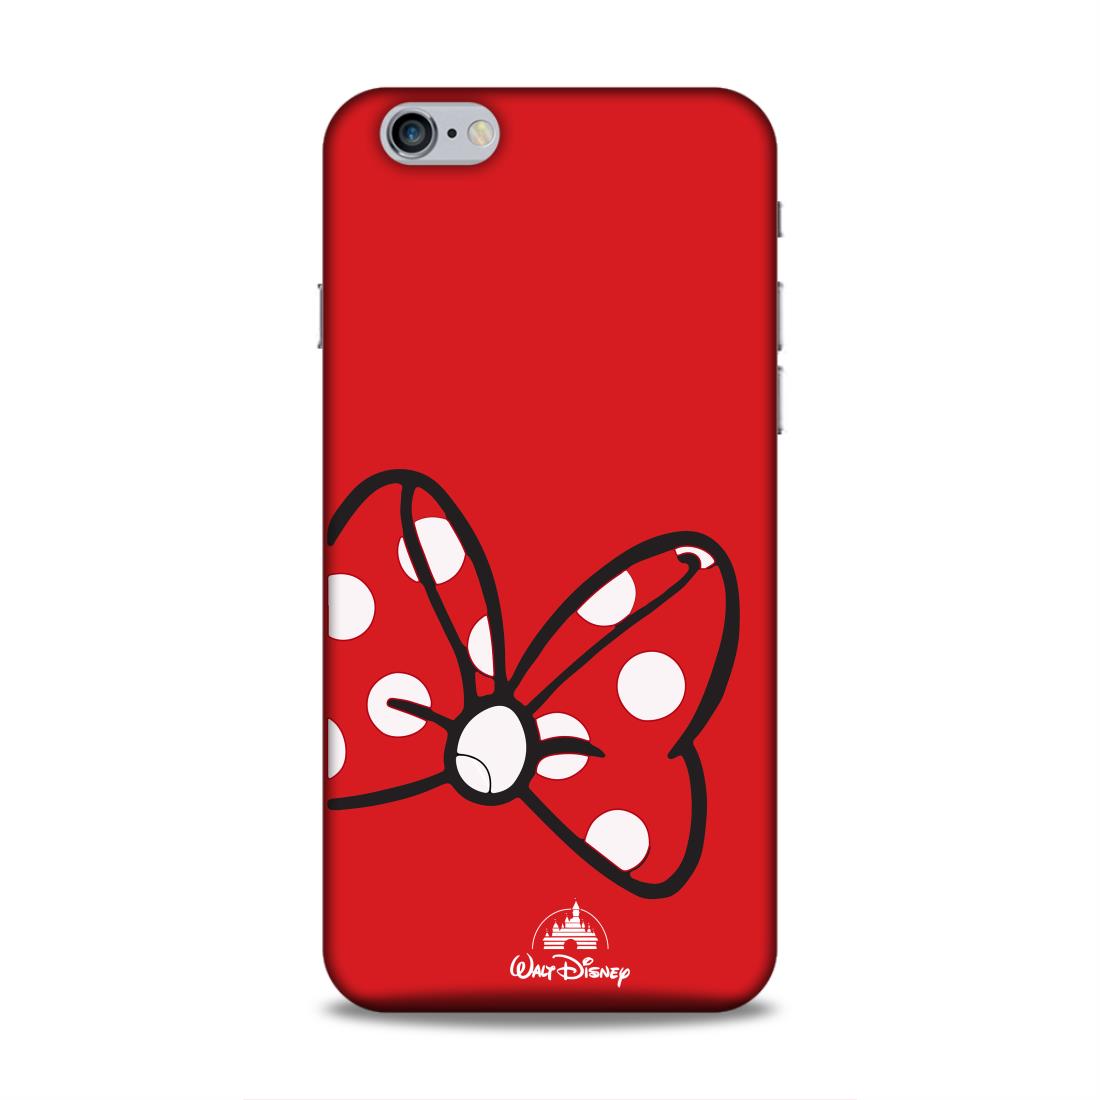 Minnie Polka Dots Hard Back Case For Apple iPhone 6 Plus / 6s Plus